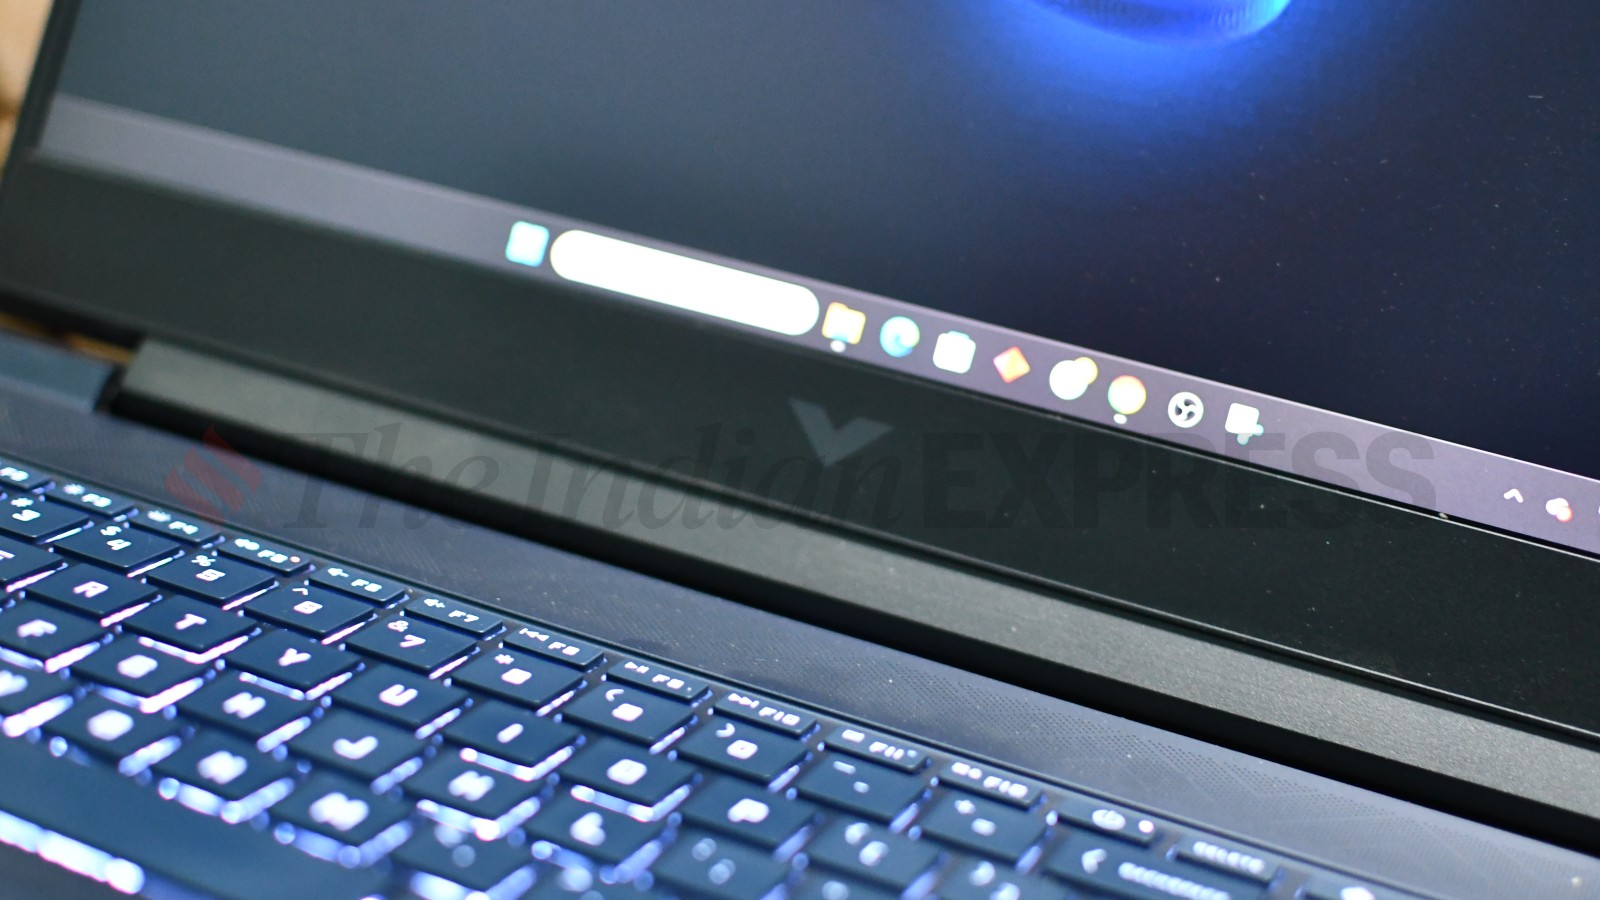 HP Victus 16 review: Mainstream and affordable - Can Buy or Not